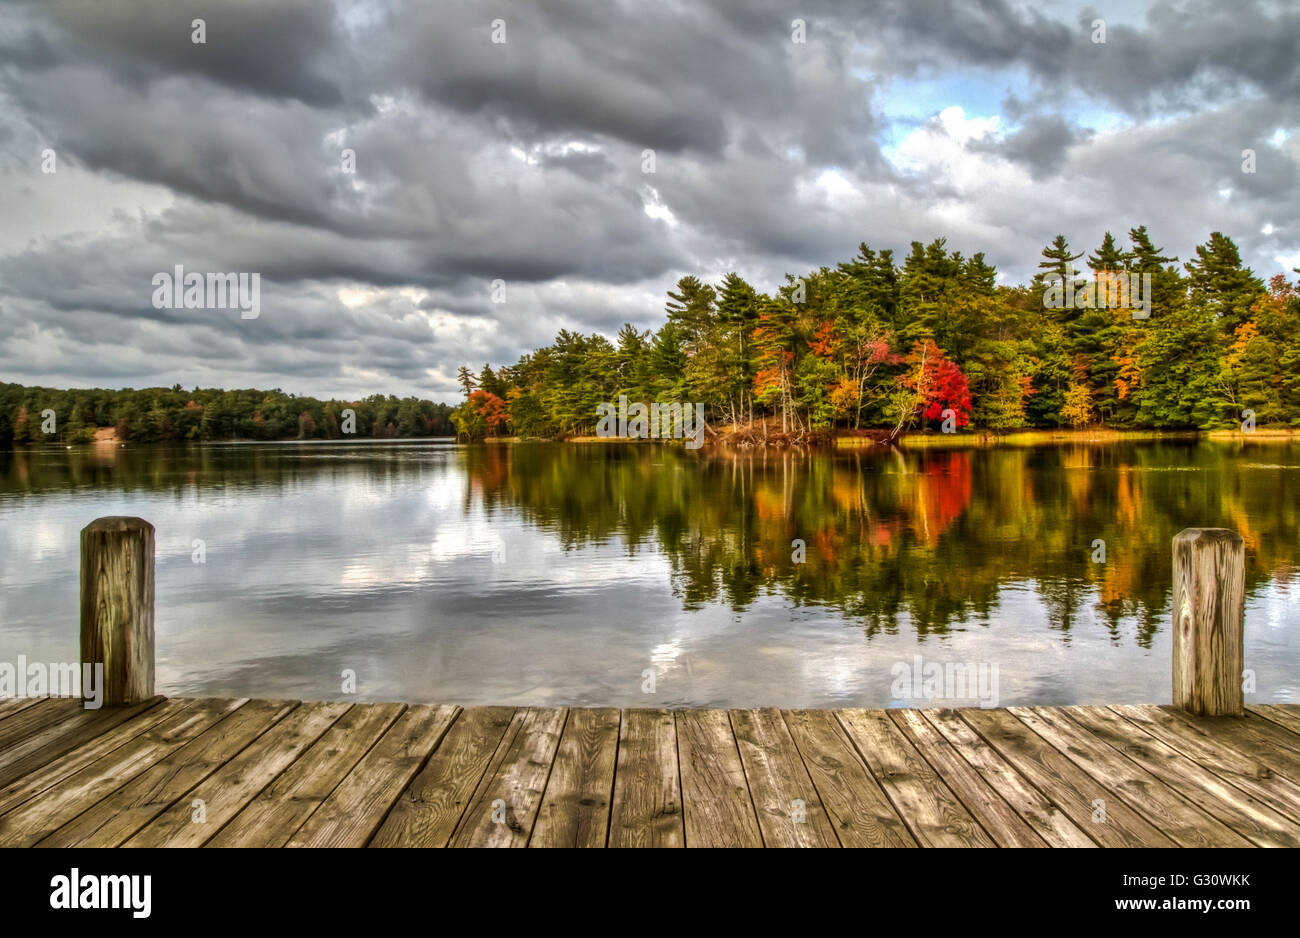 An Autumn Day At The Lake. Wooden dock overlooking a lake and an island ablaze in fall splendor. Ludington State Park. Ludington Stock Photo